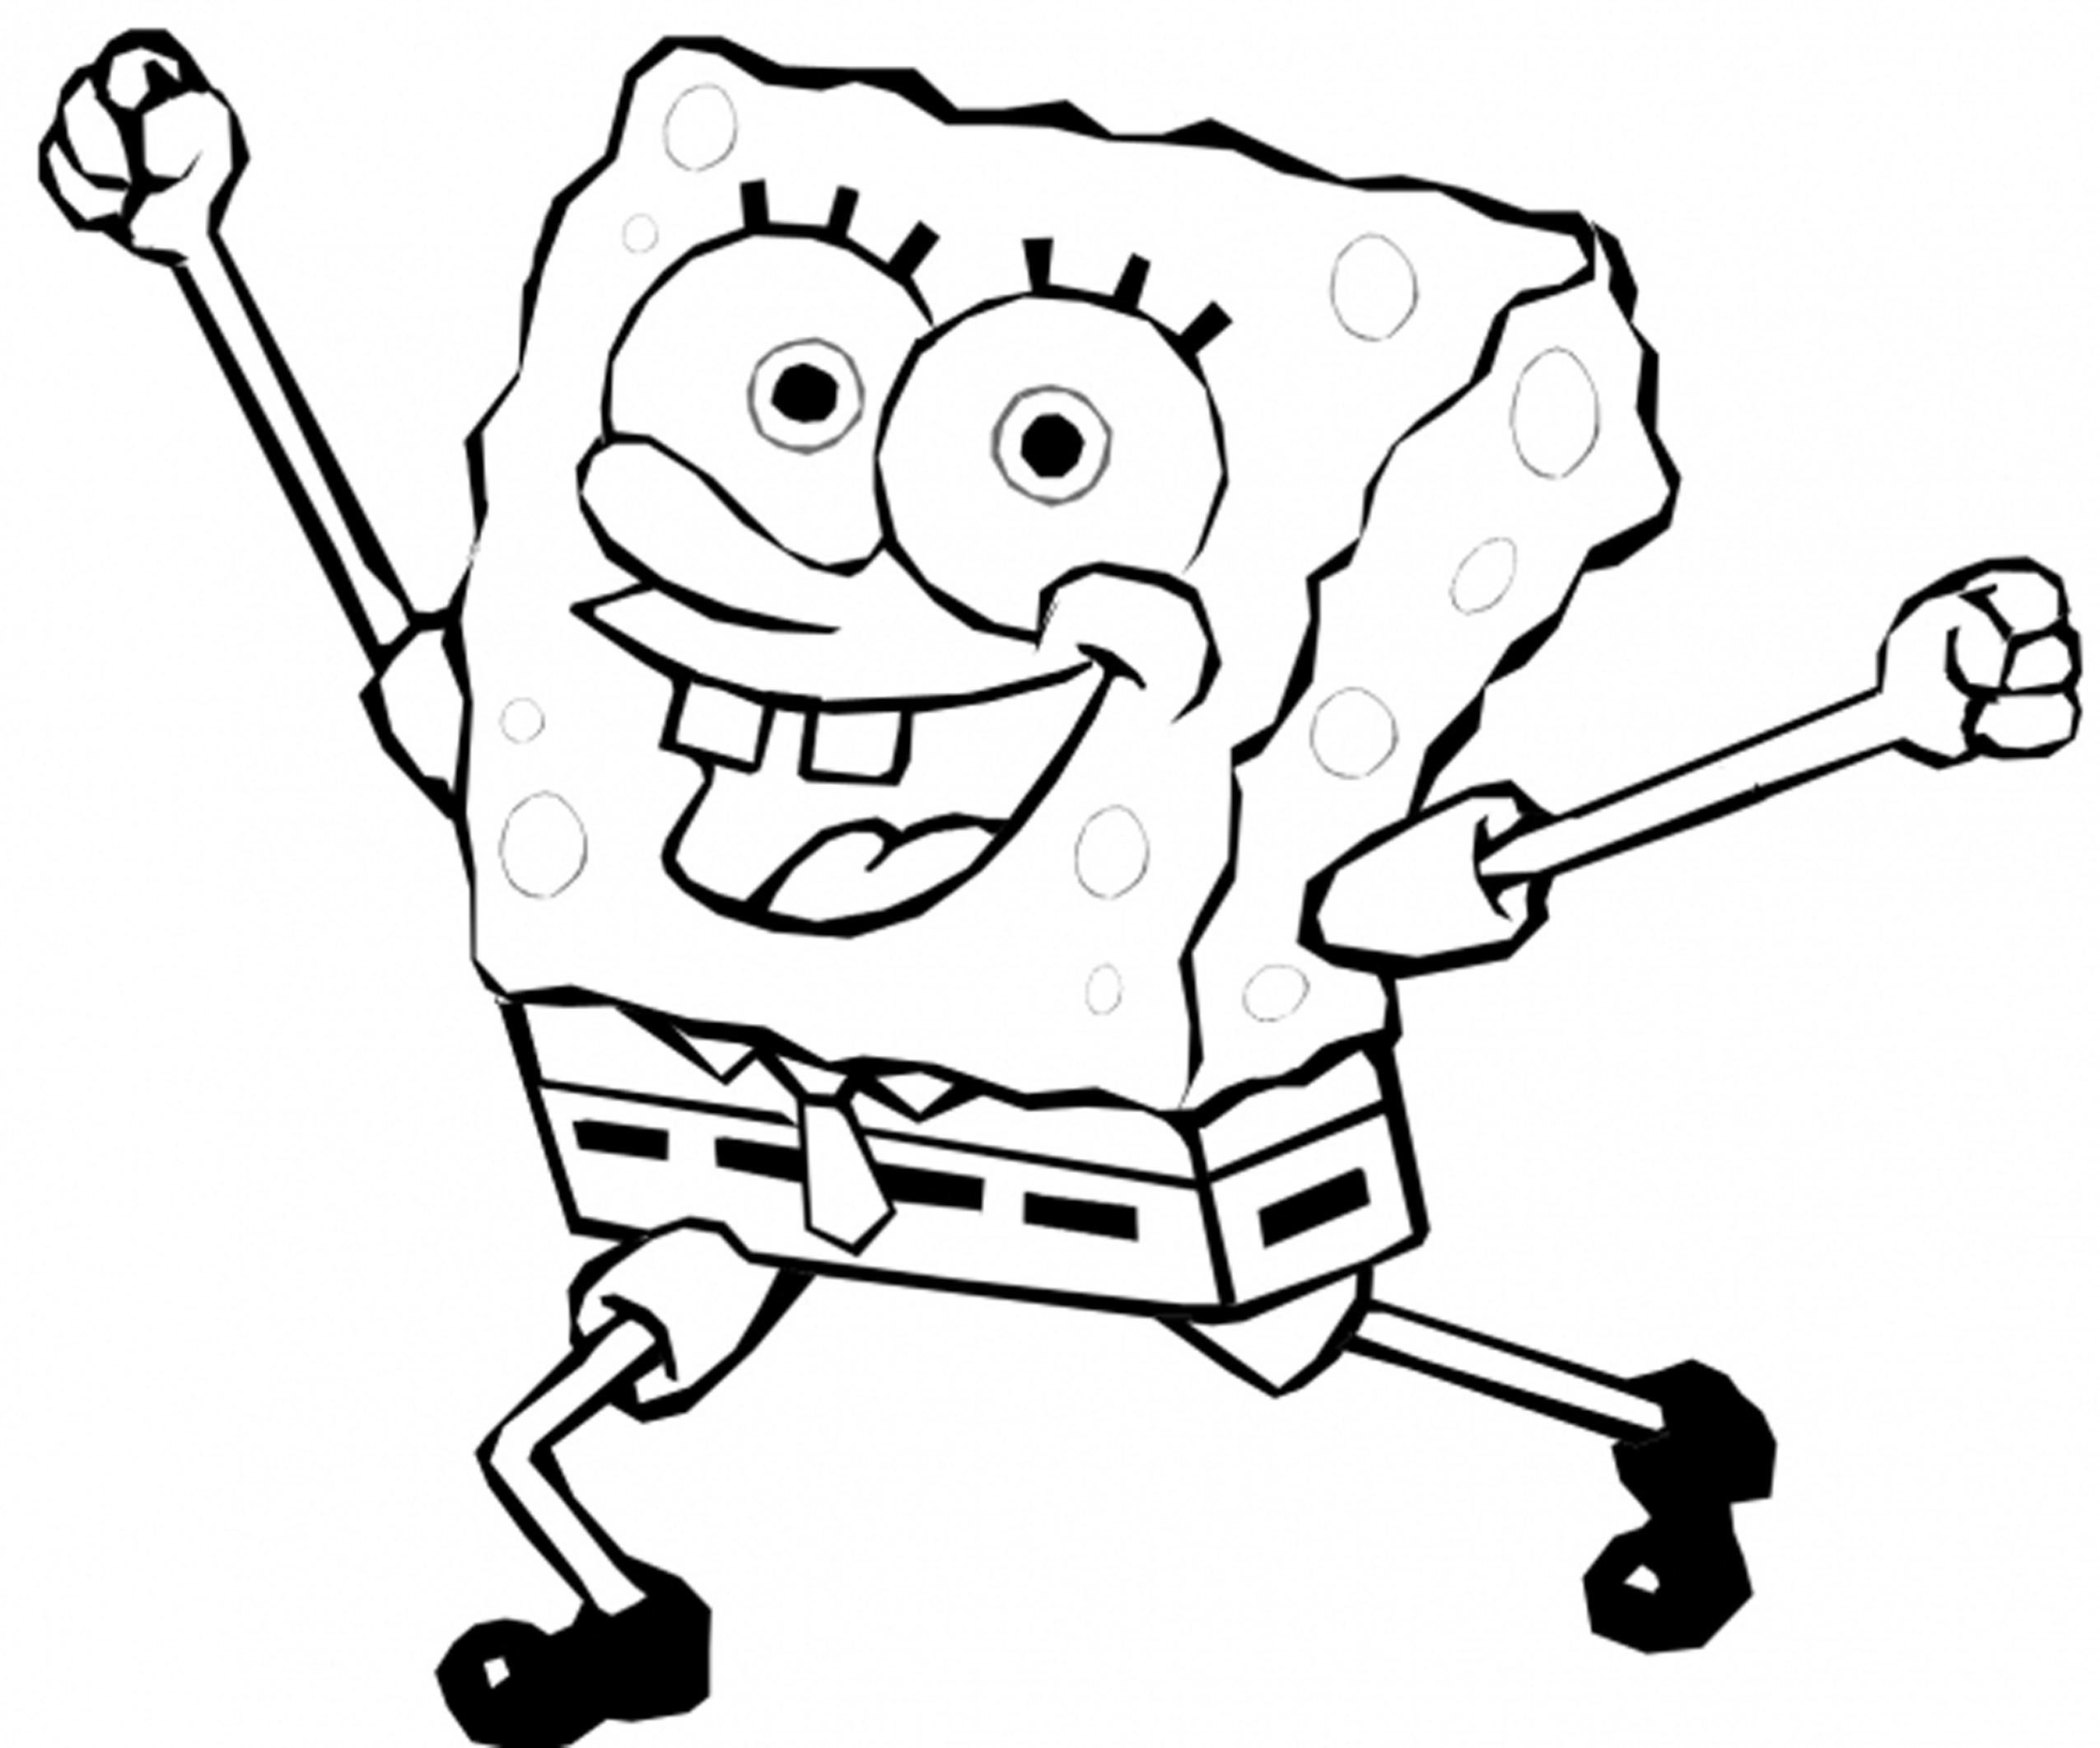 Coloring Page Wallpaper On Wallpaperplay Free Spongebob House Pages For Kids To